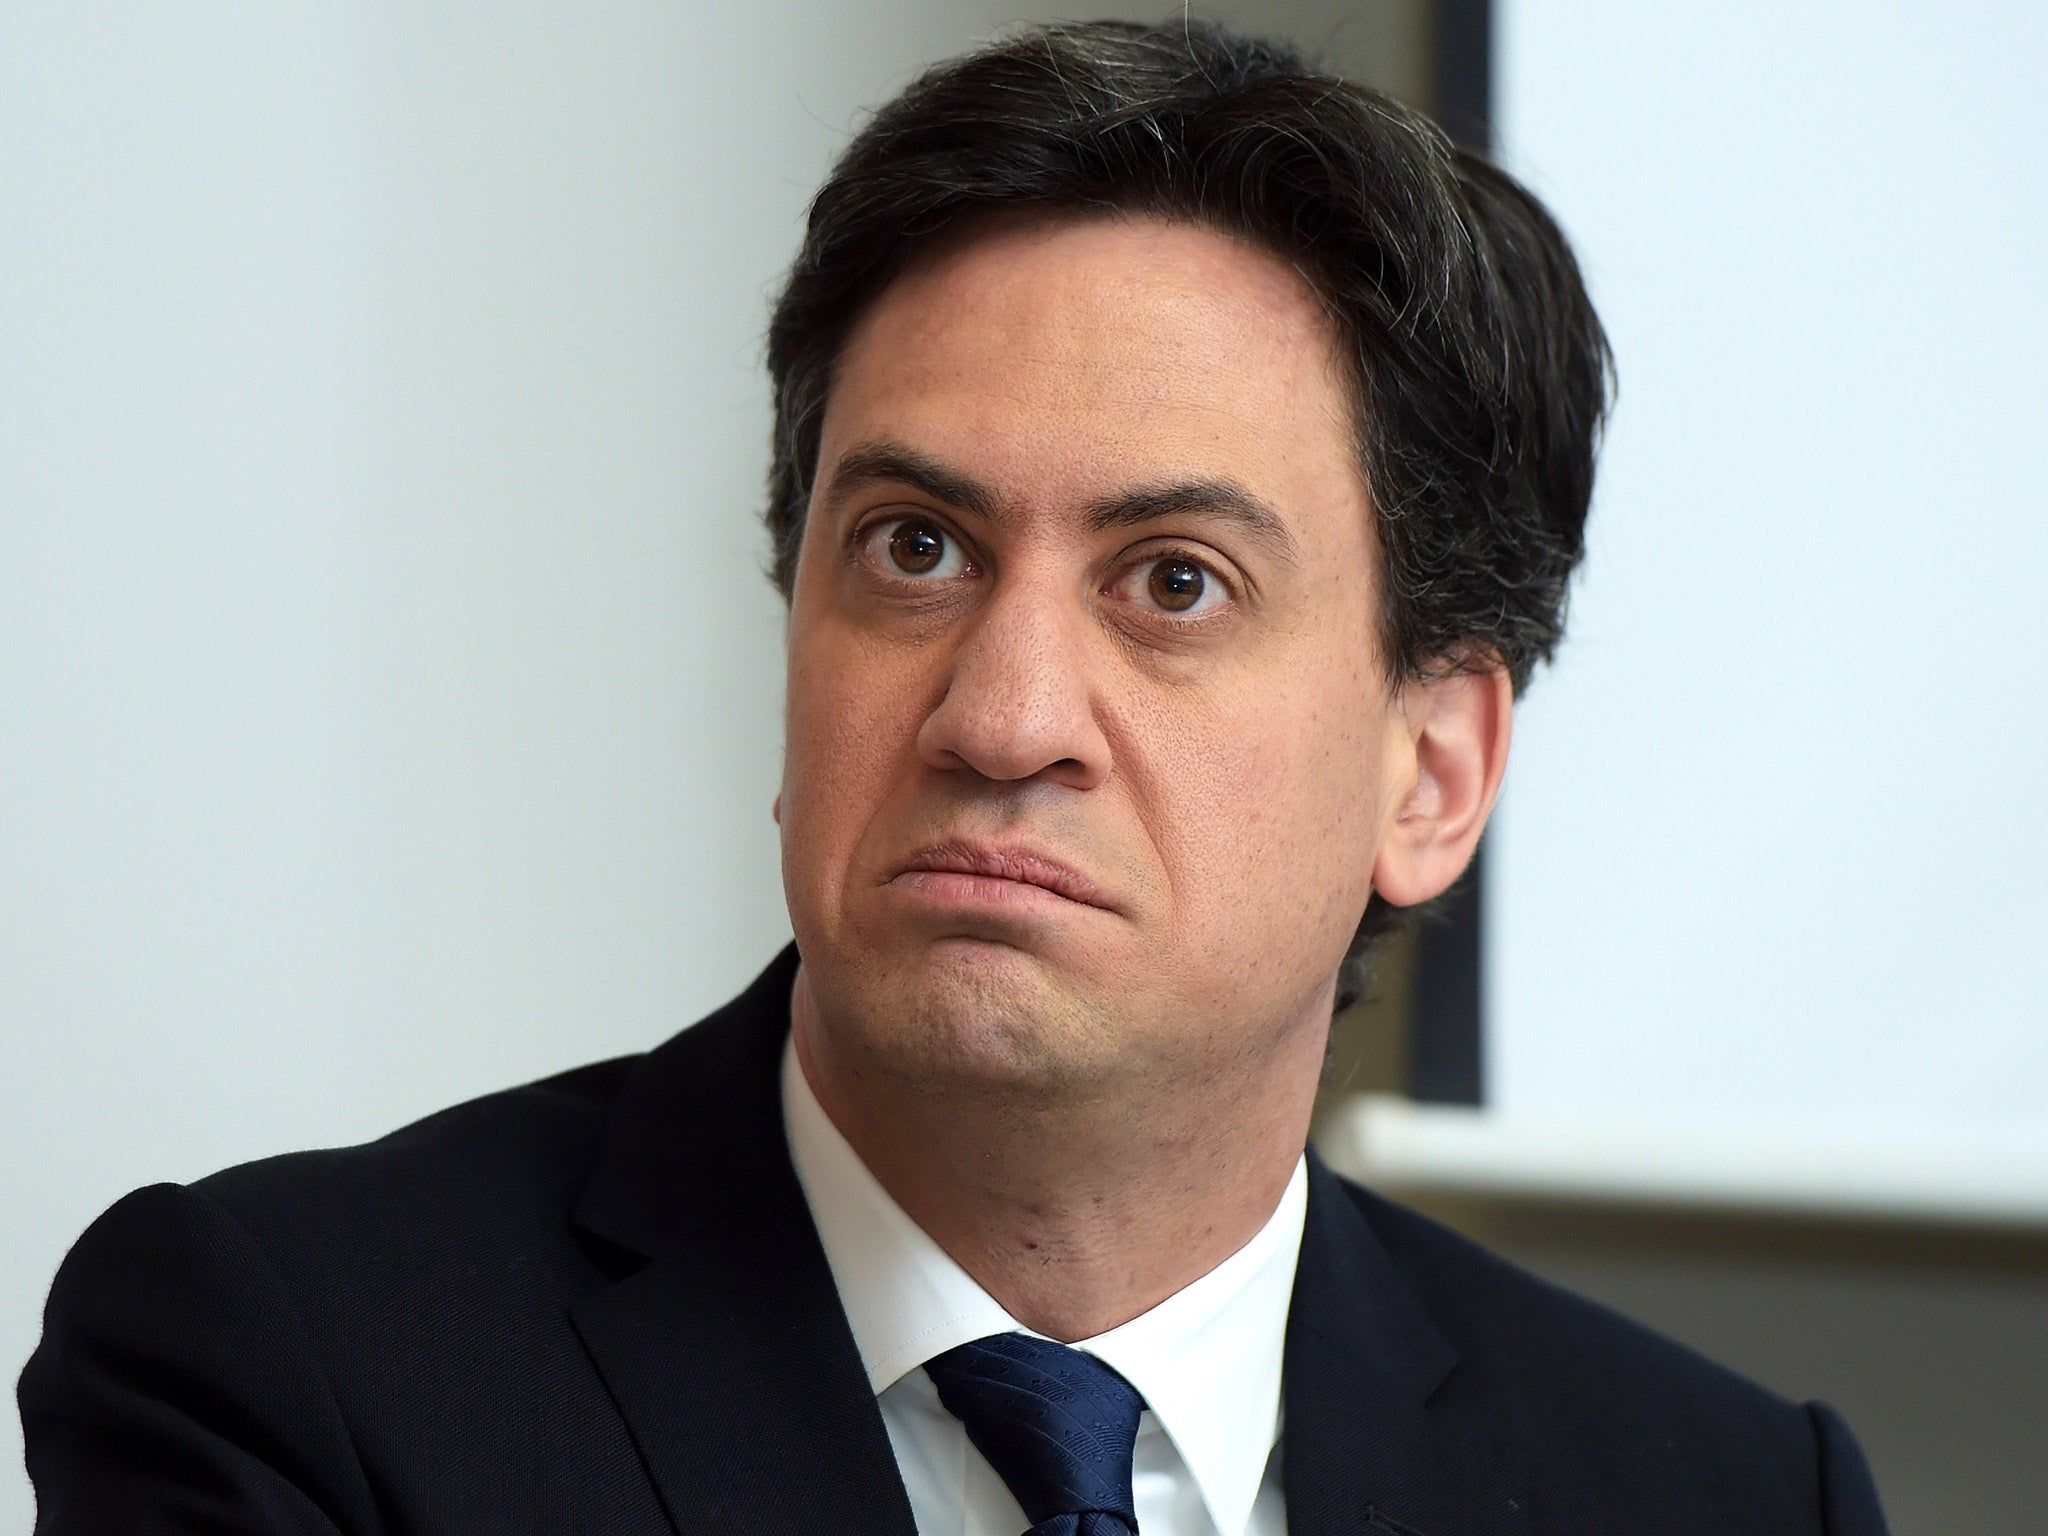 Ed Miliband has come under attack from Blairites